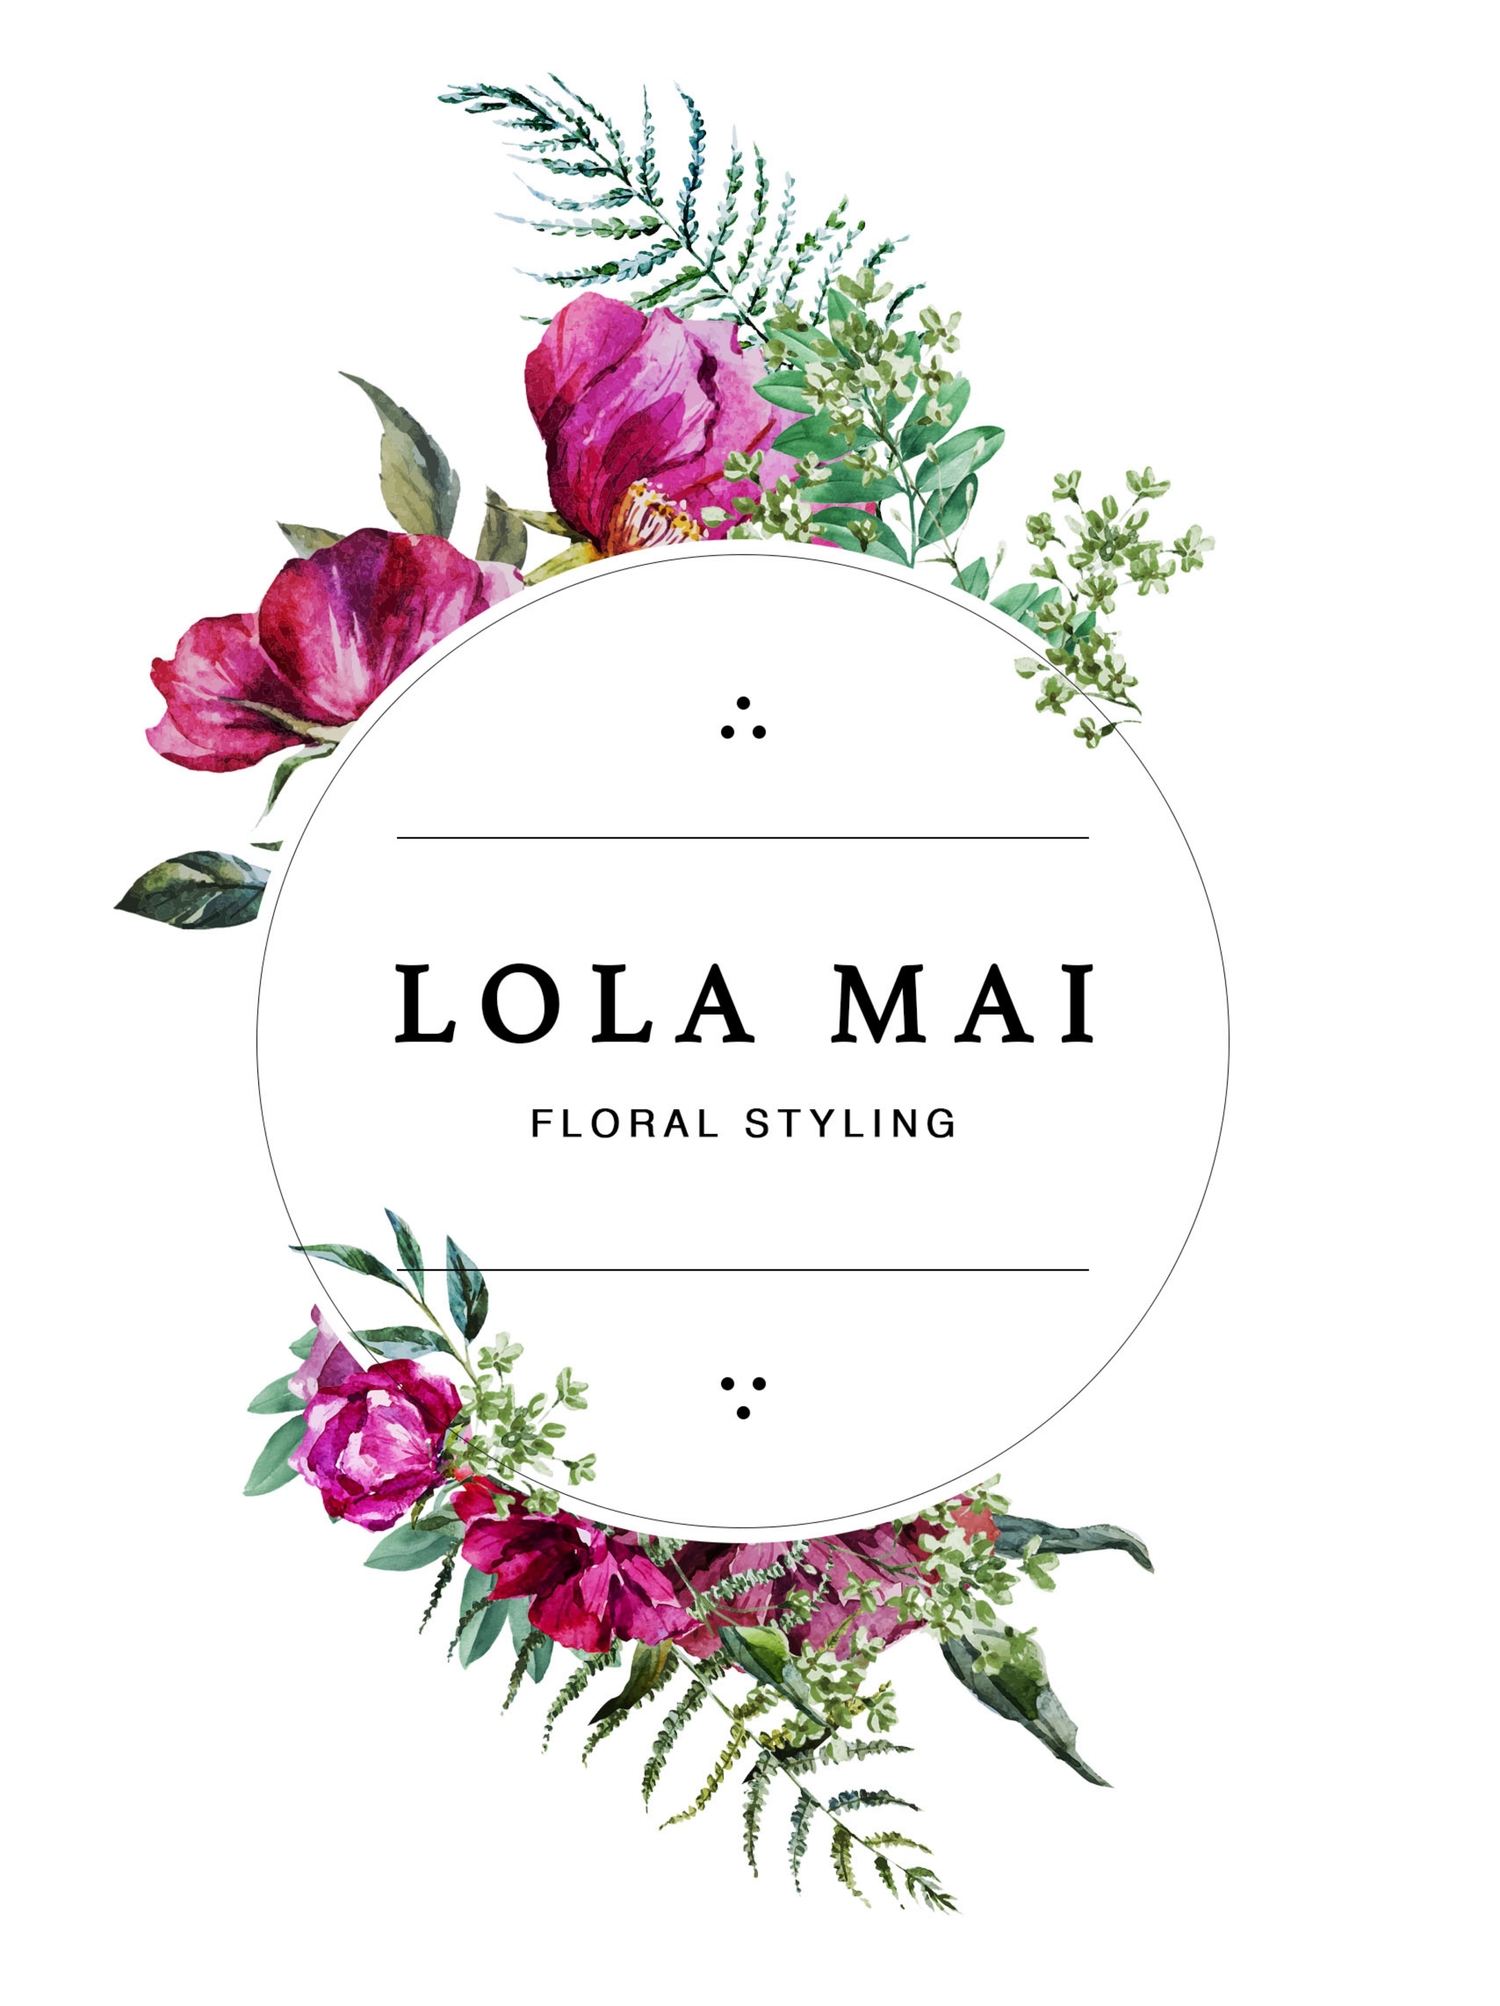 Lola Mai Floral Styling